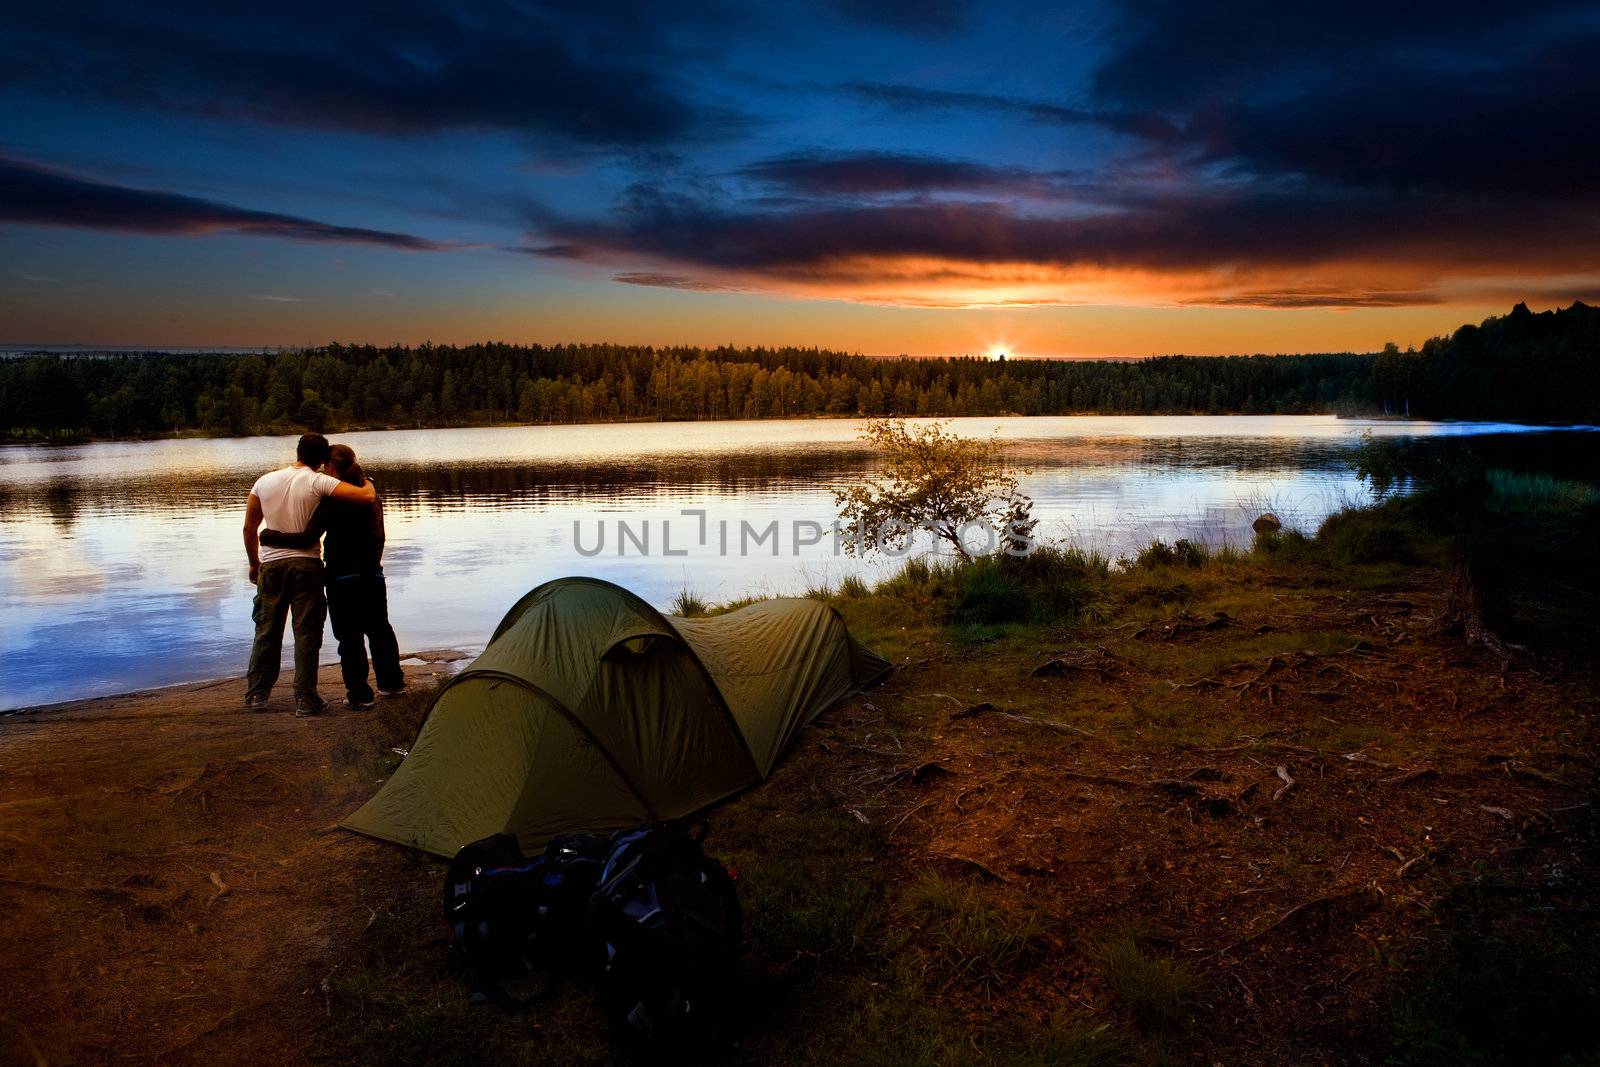 Camping Lake Sunset by leaf